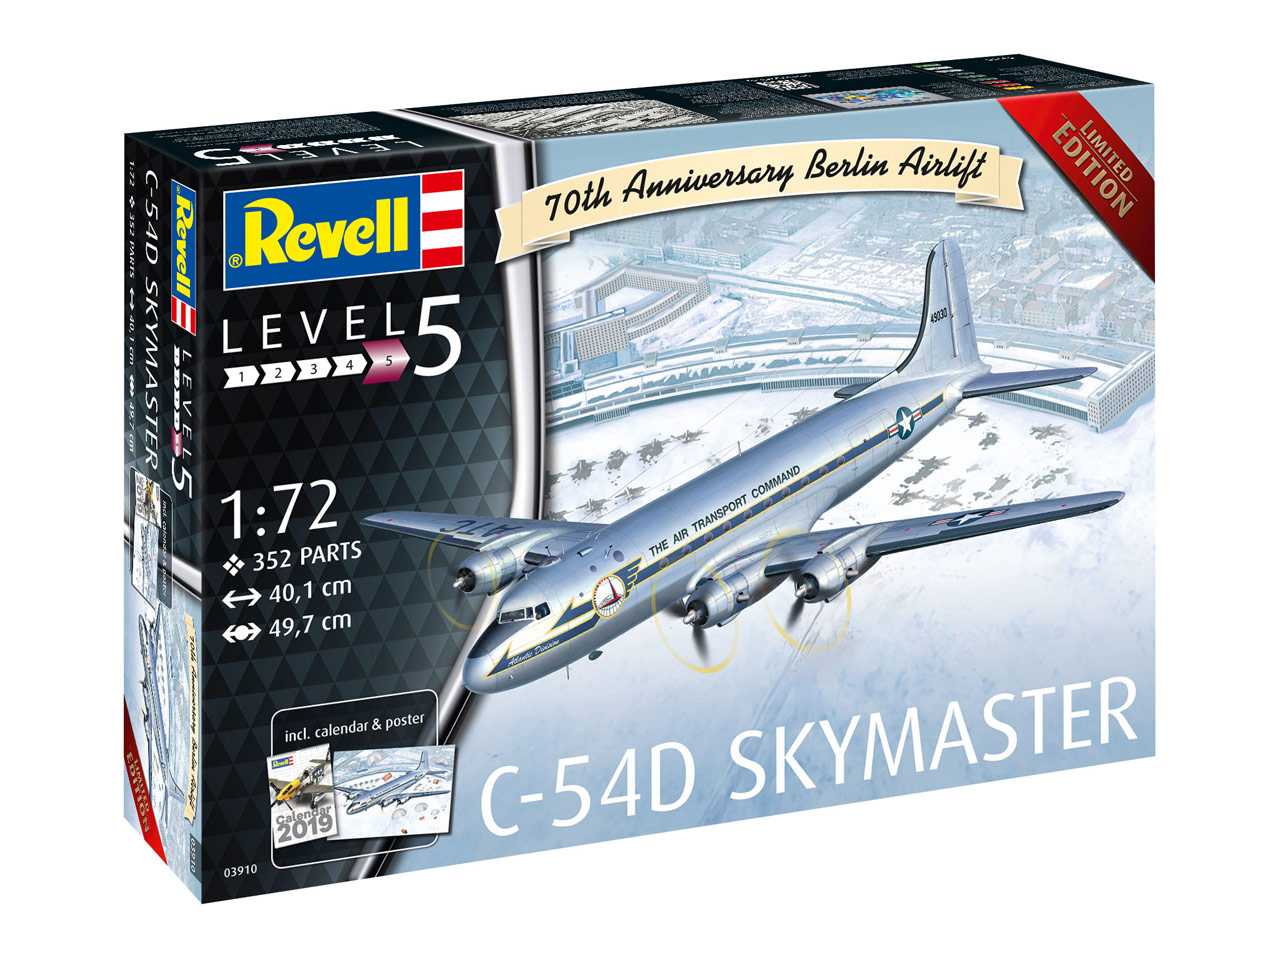 Revell Limited Edition 03910 - C-54D Skymaster 70th Anniversary Berlin Airlift (1:72)